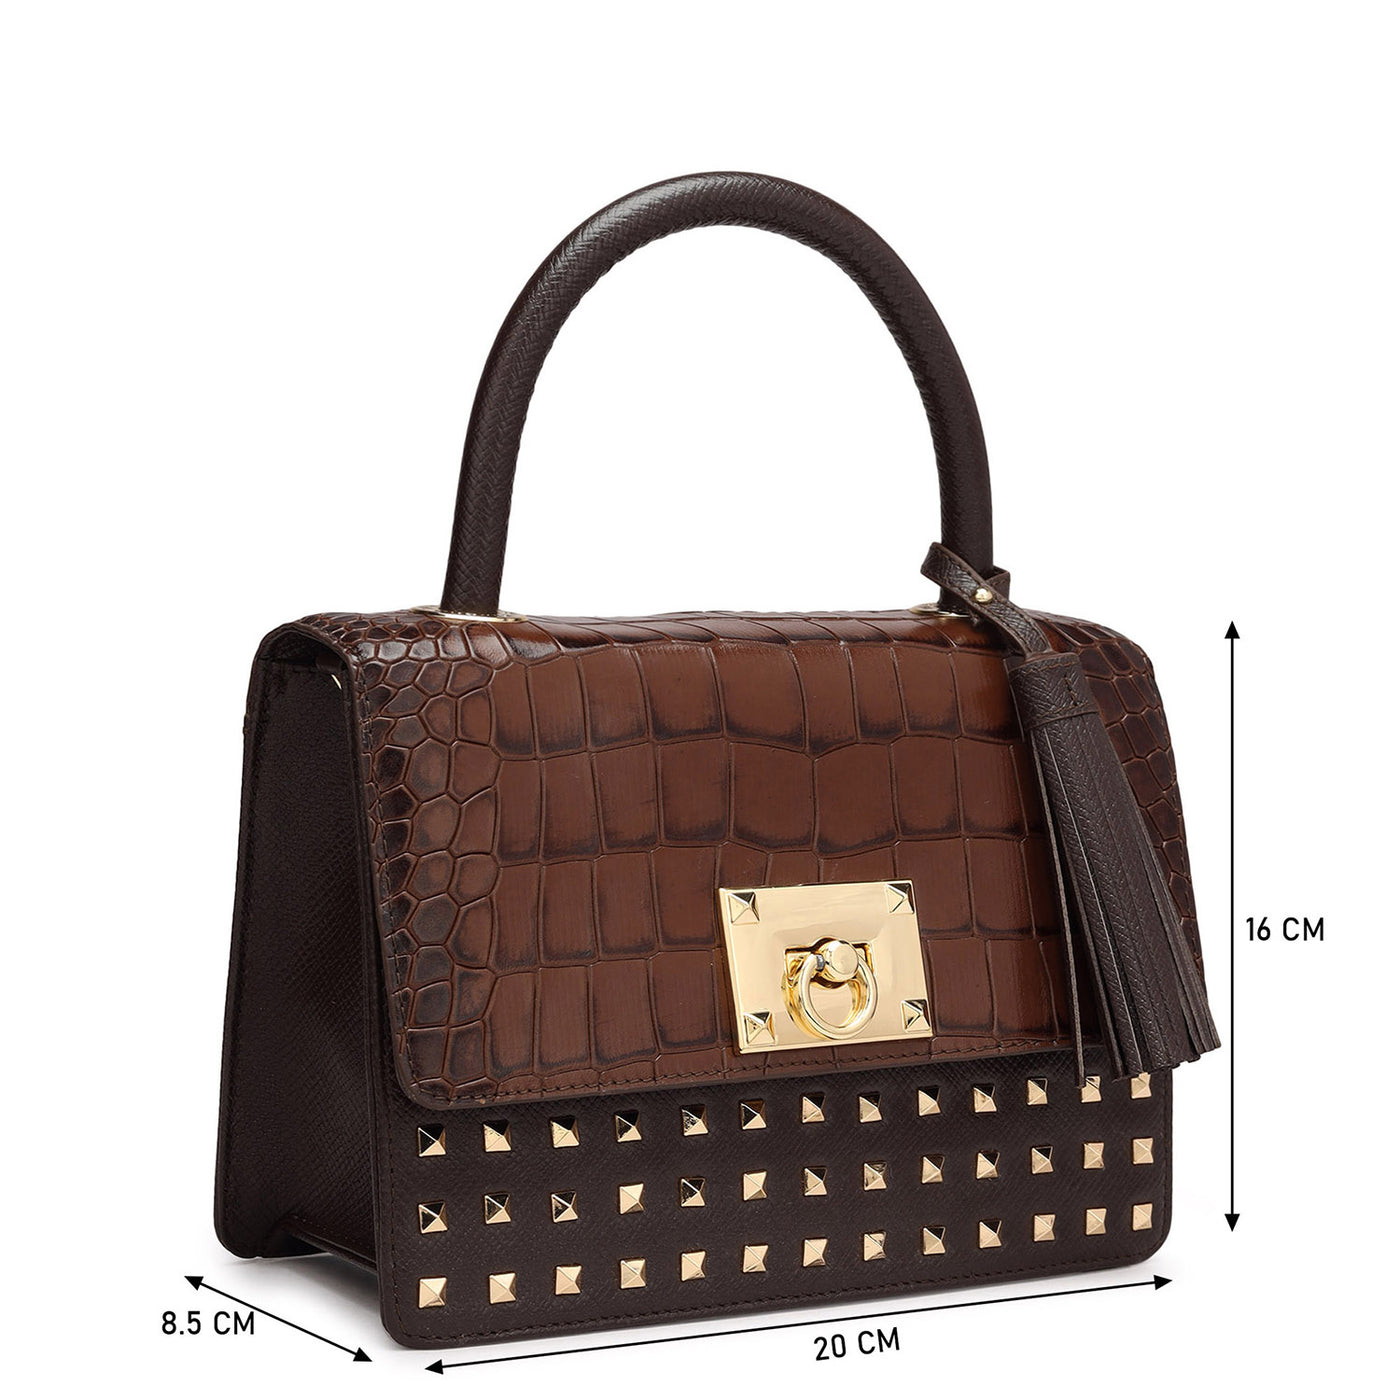 Small Croco Franzy Leather Satchel - Brown